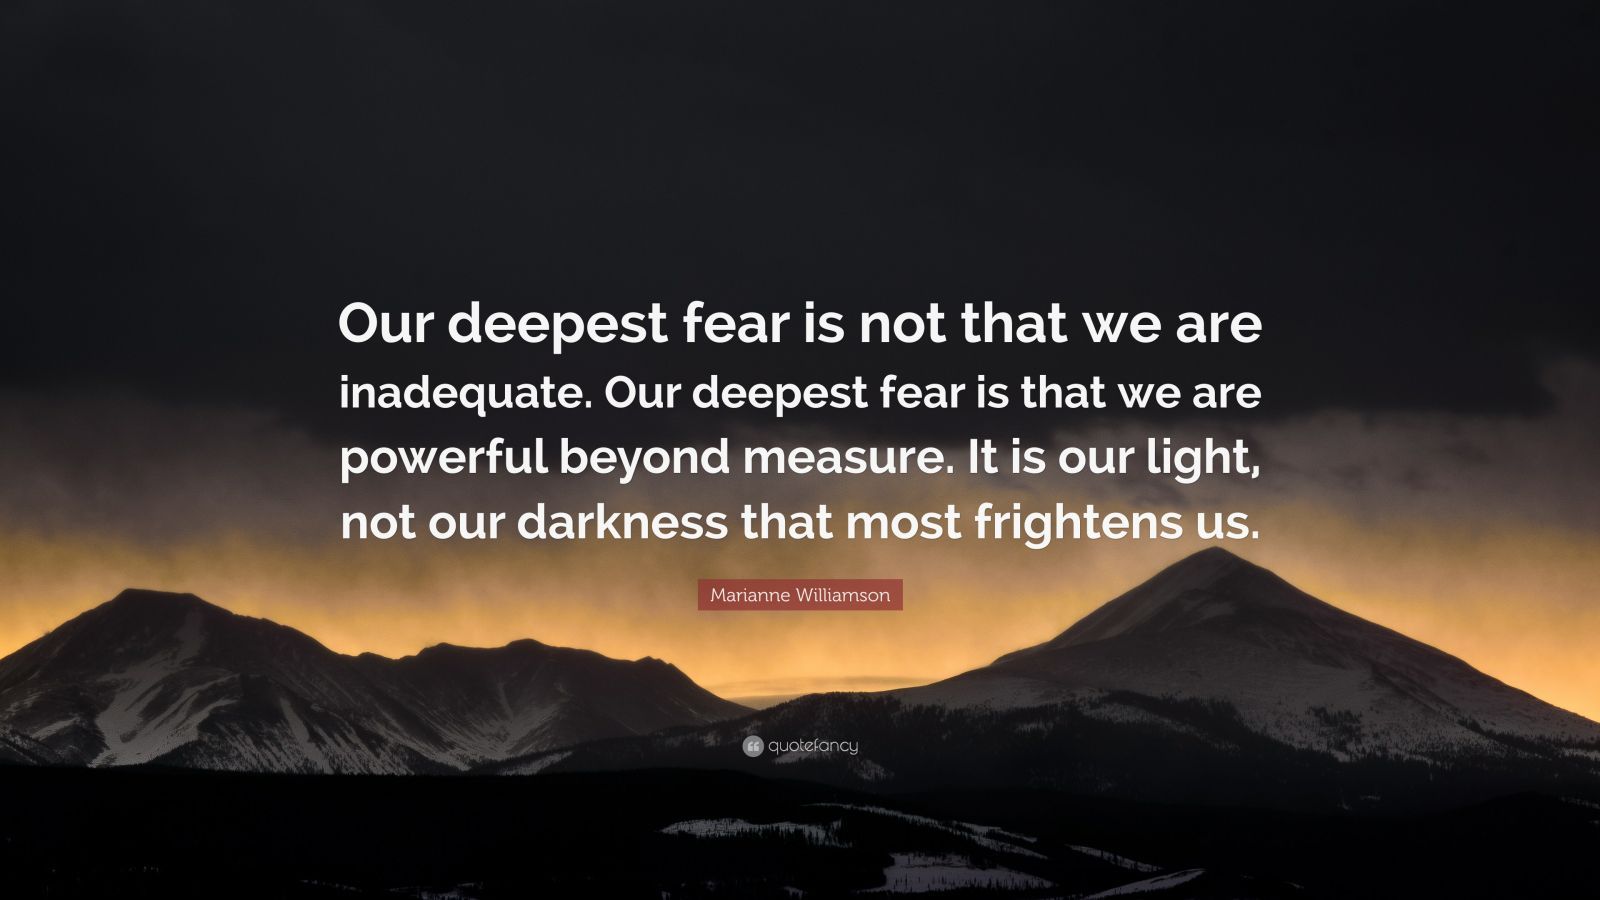 Marianne Williamson Quote: “Our deepest fear is not that we are